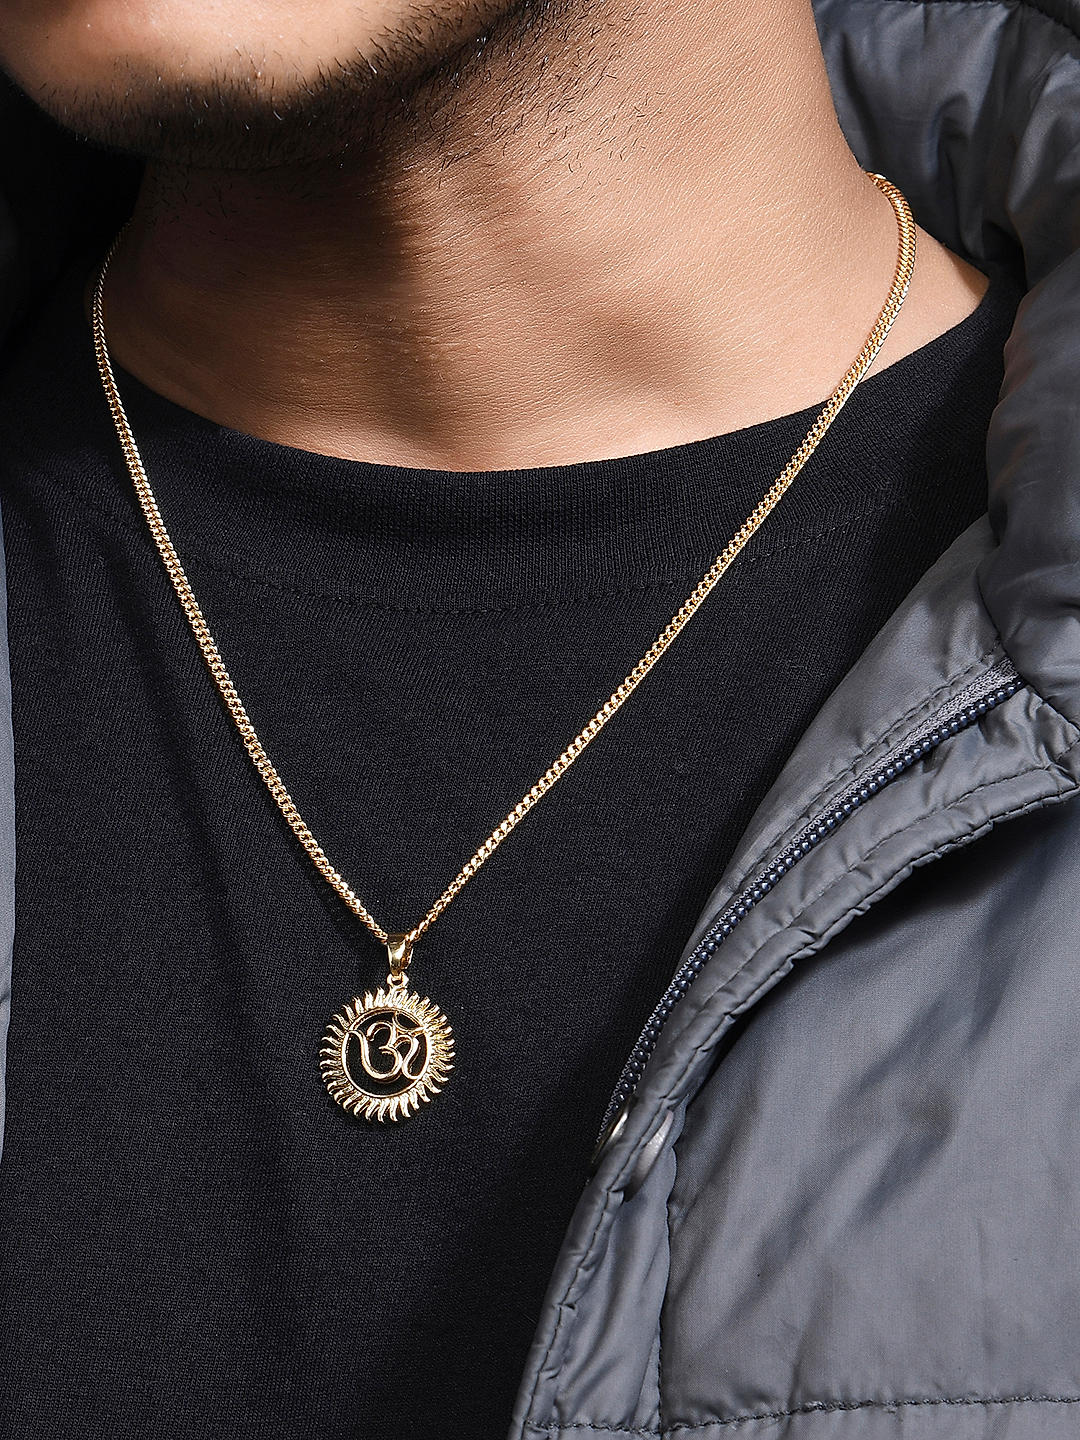 SALE 18K Solid Gold G Pendant Necklace, READY TO SHIP Initial Monogram -  Abhika Jewels